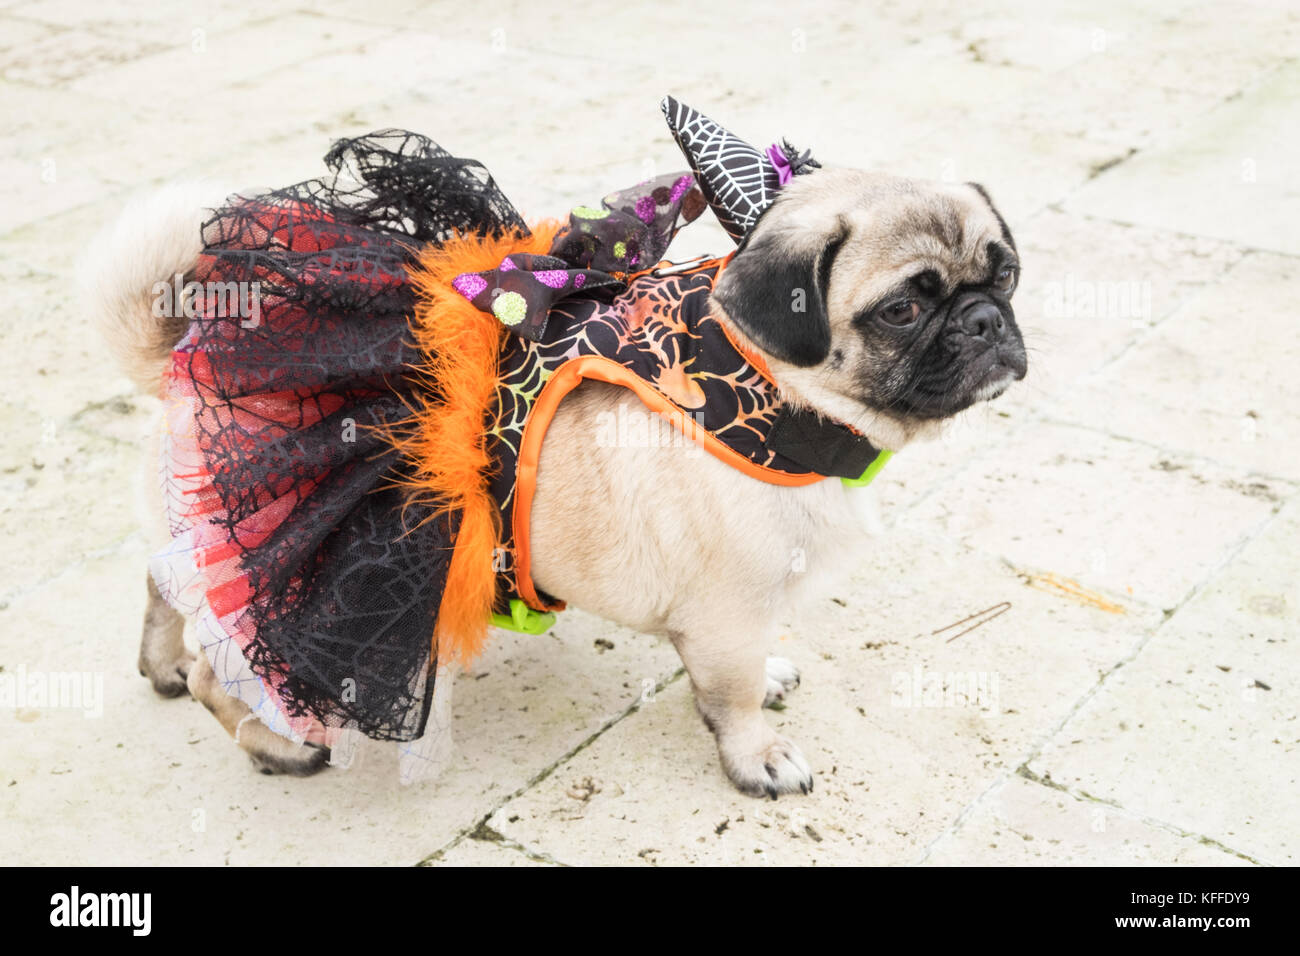 This pug,Elsa,aged,3 in January, from Essex,won Best in Show. Laugharne, Carmarthenshire, Wales UK. 28th Oct, 2017. PugFest Halloween event, held at Corran Resort and Spa,Laugharne, Carmarthenshire, Wales, U.K.The halloween pug dog show was organised by Pugfest a non profit organisation putting on events across UK to support animal welfare.Pugfest is a celebration of pugs and cross breeds and a family fun day. Credit: Paul Quayle/Alamy Live News Stock Photo